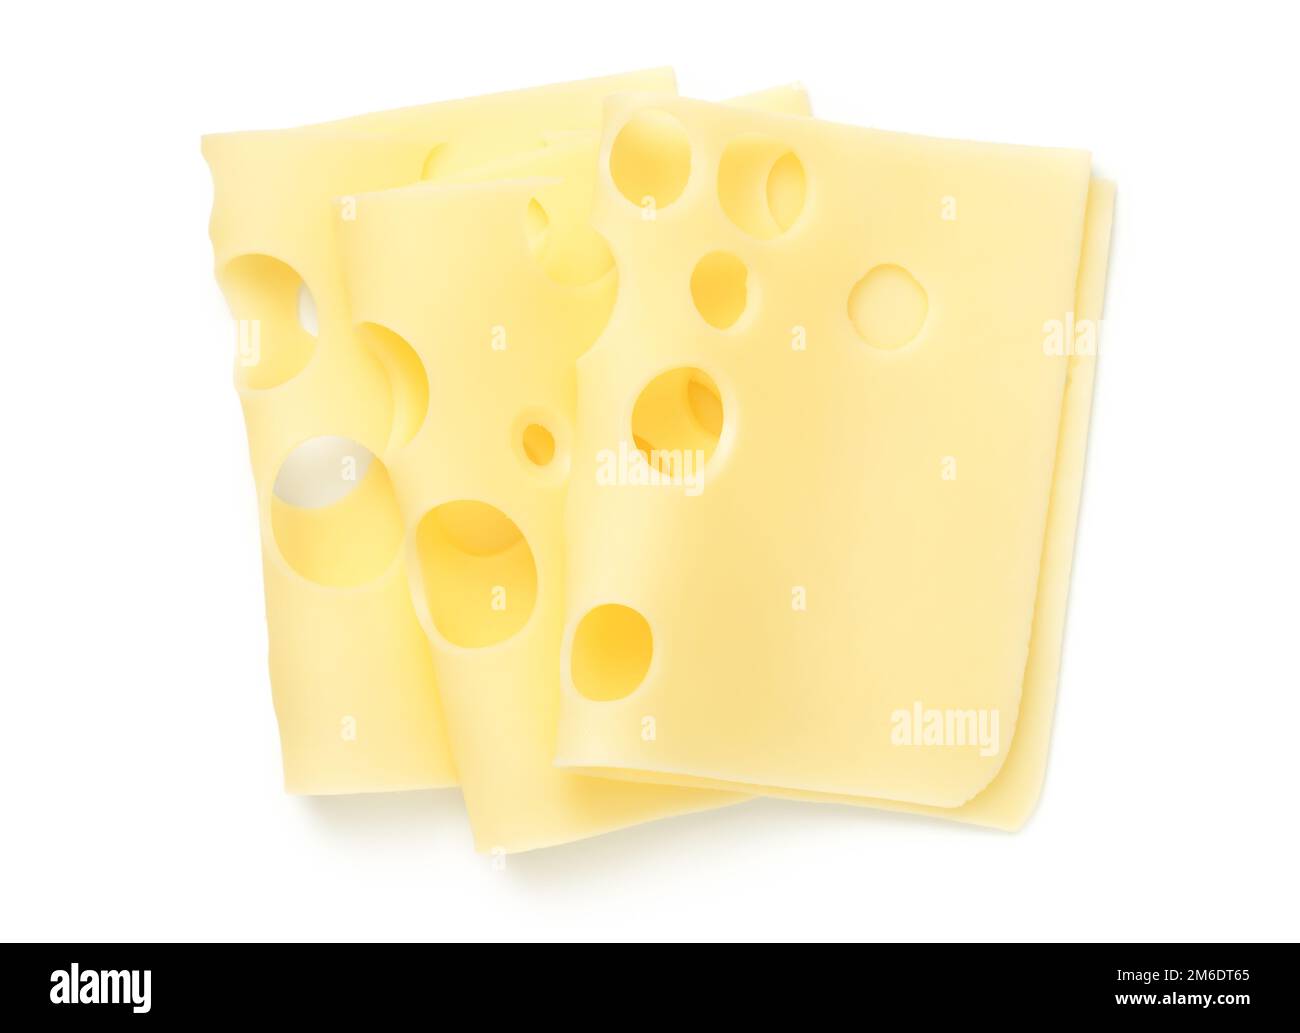 Emmentaler Cheese Slices Isolated On White Background Stock Photo